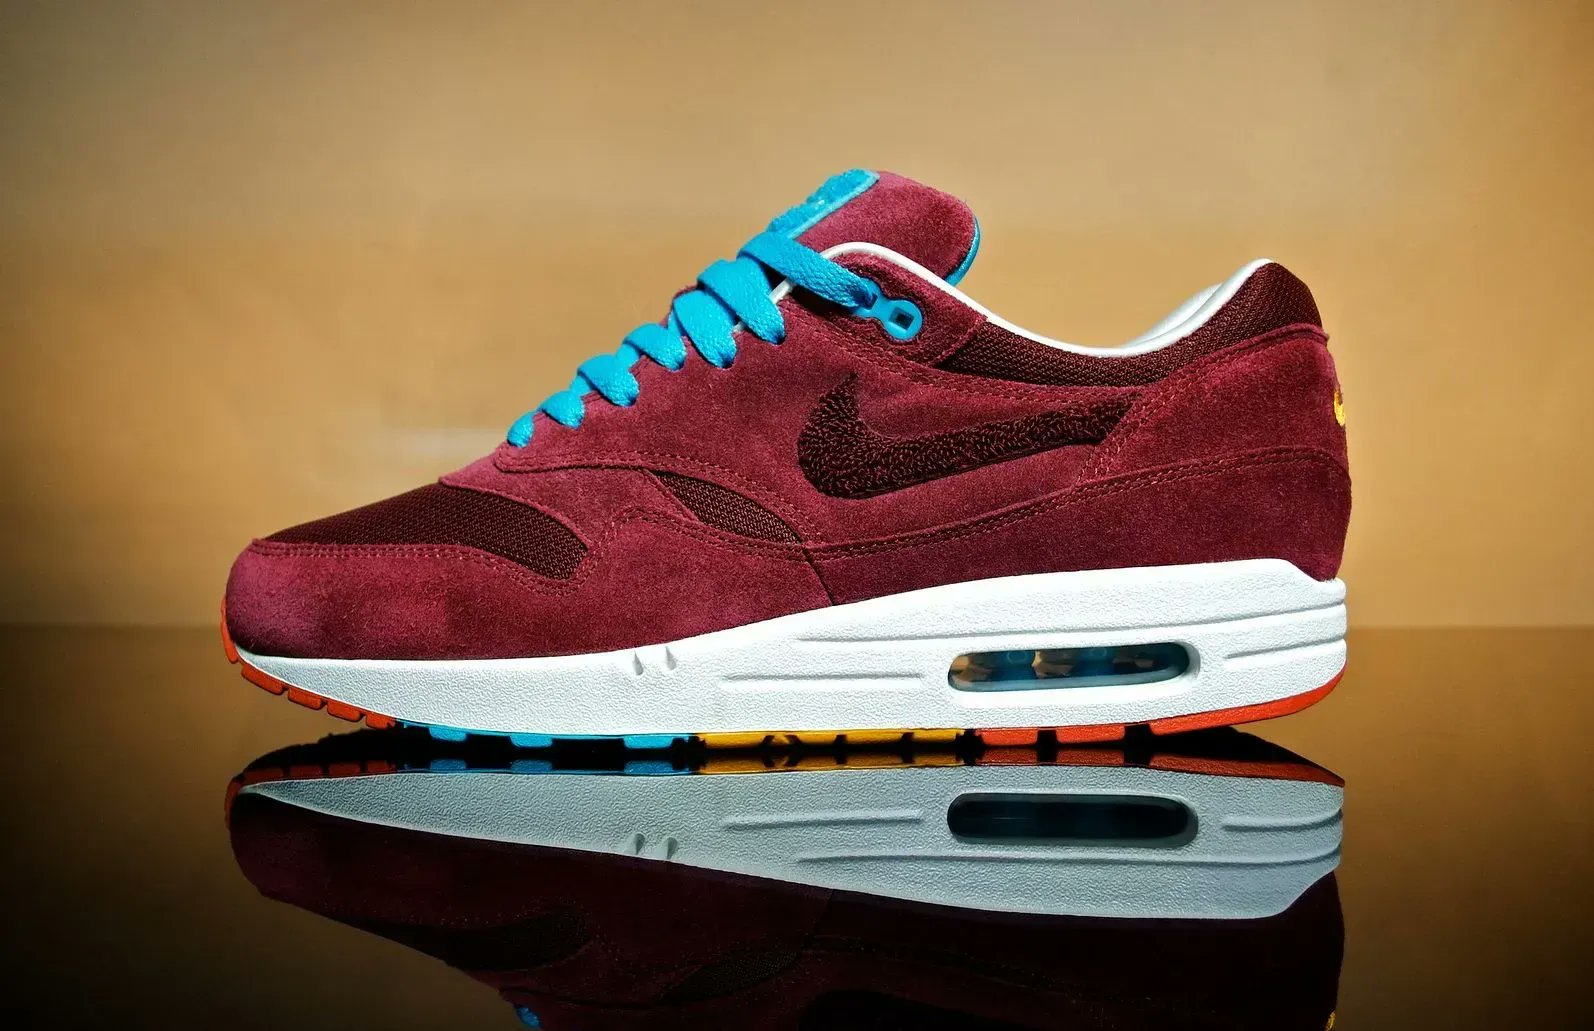 KicksFinder on "#KFFacts | It was 13 years ago to this day, that the Parra x Patta x Nike Air Max 1 "Cherrywood" released. It was limited to 258 pairs worldwide